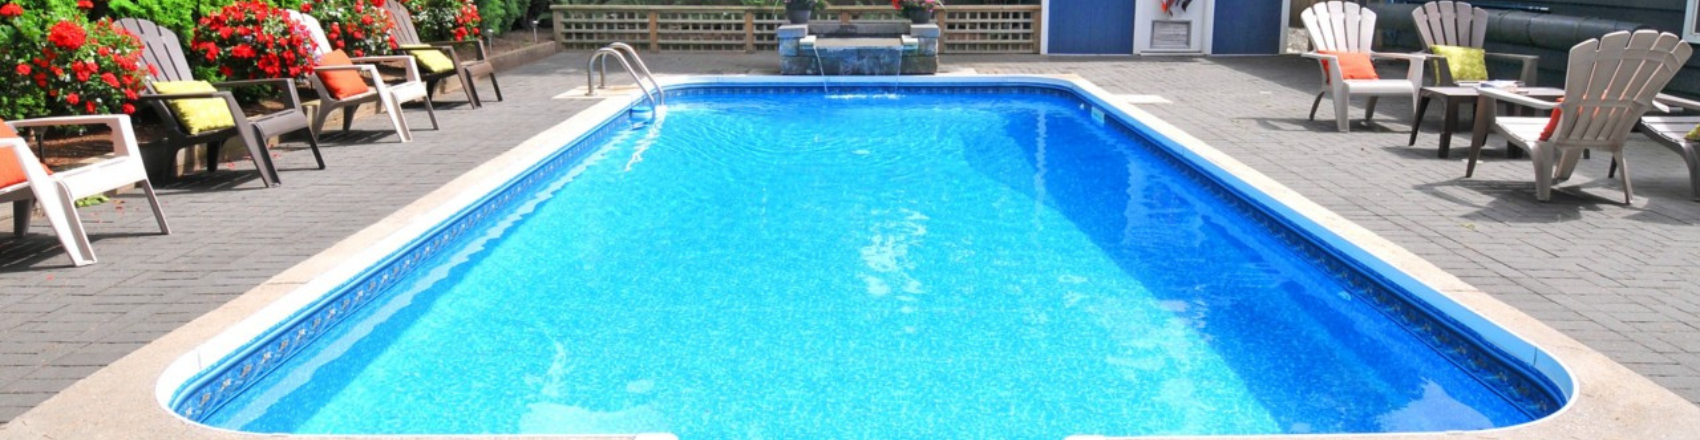 Tips for Enjoying Your Pool in Cooler Weather - Vita Filters